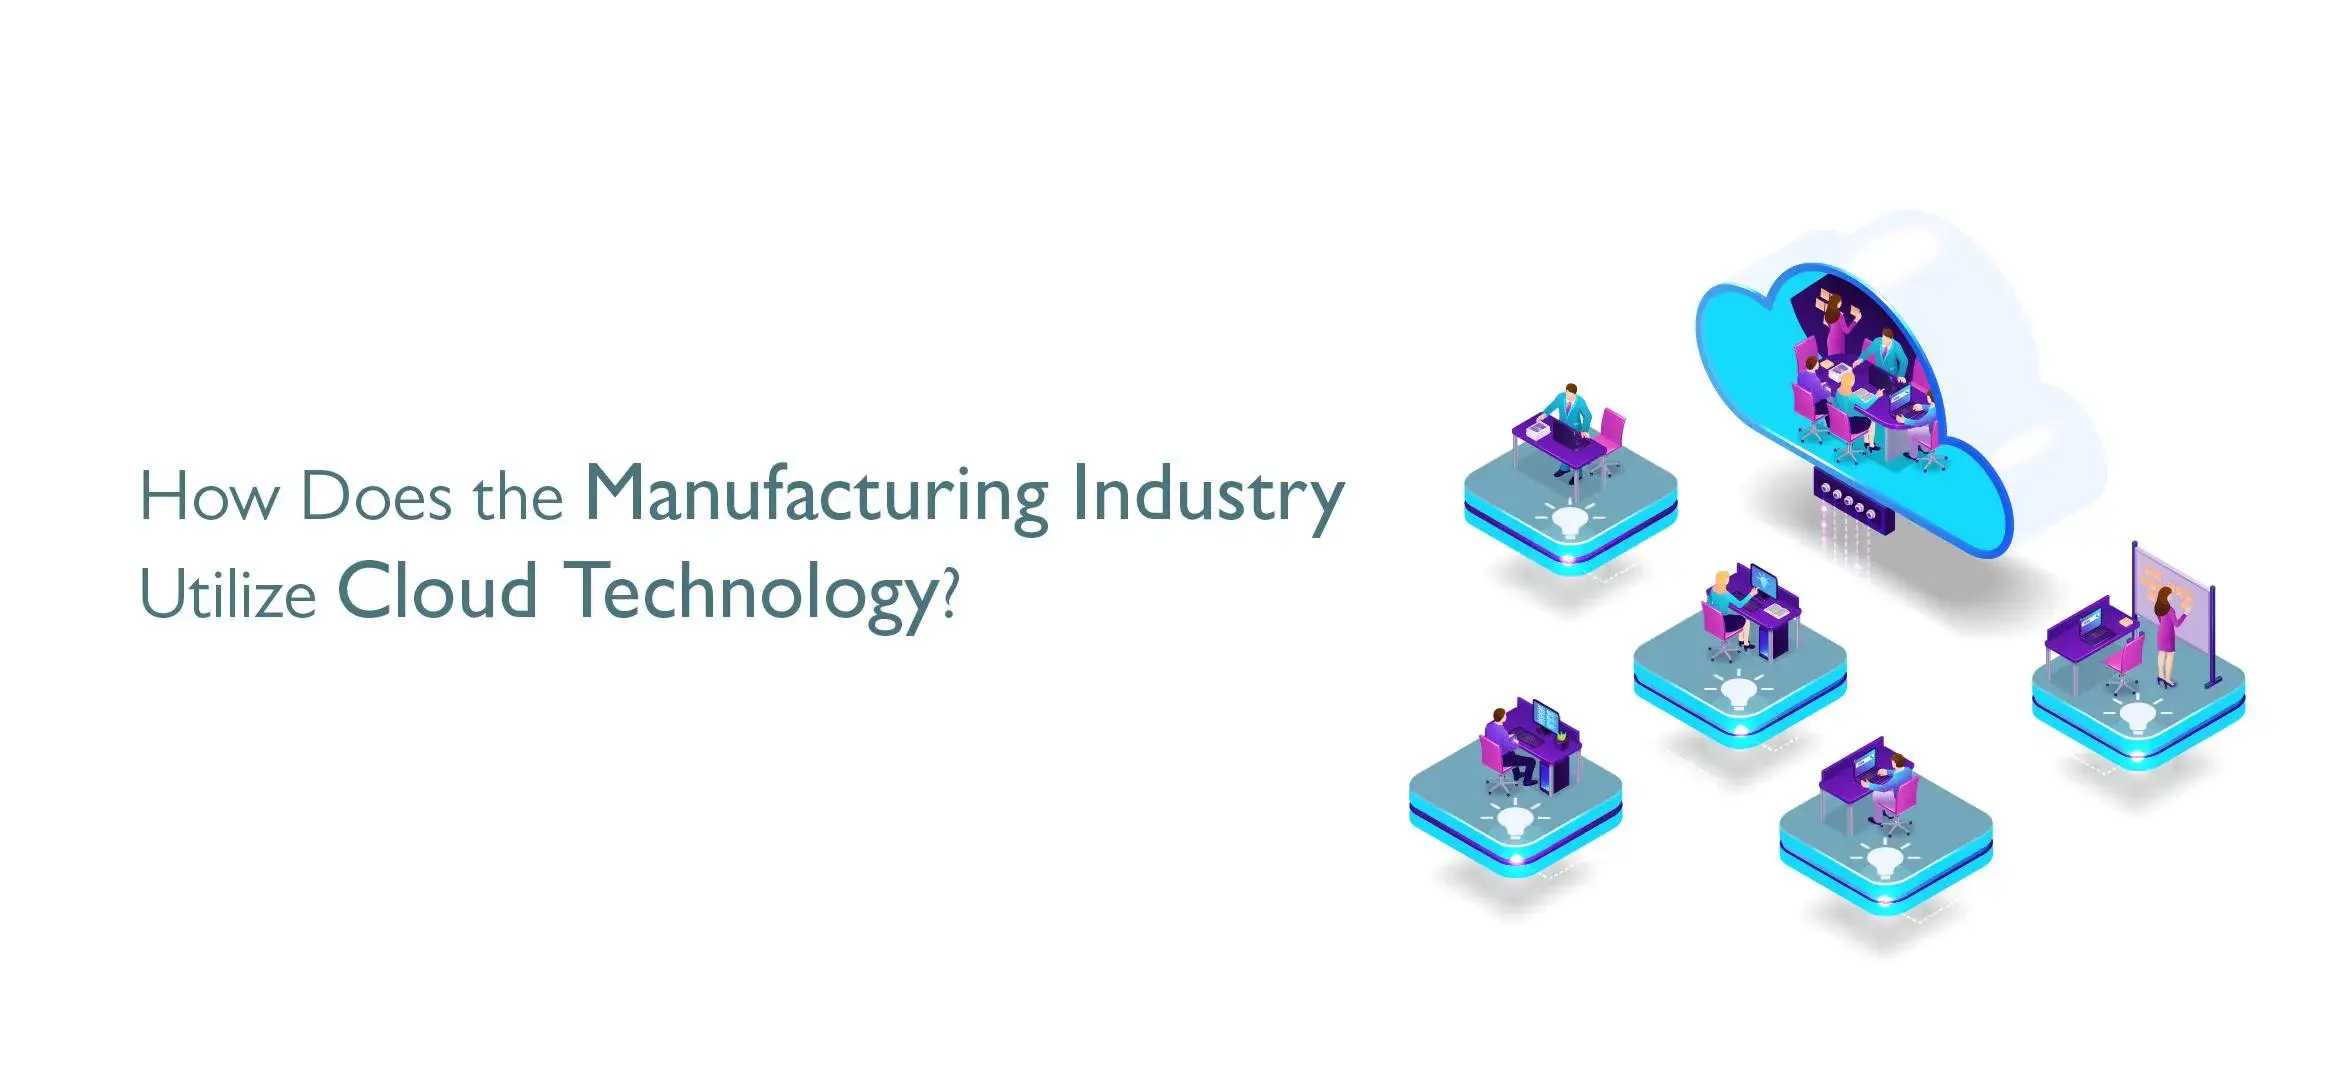 How Does the Manufacturing Industry Utilize Cloud Technology?